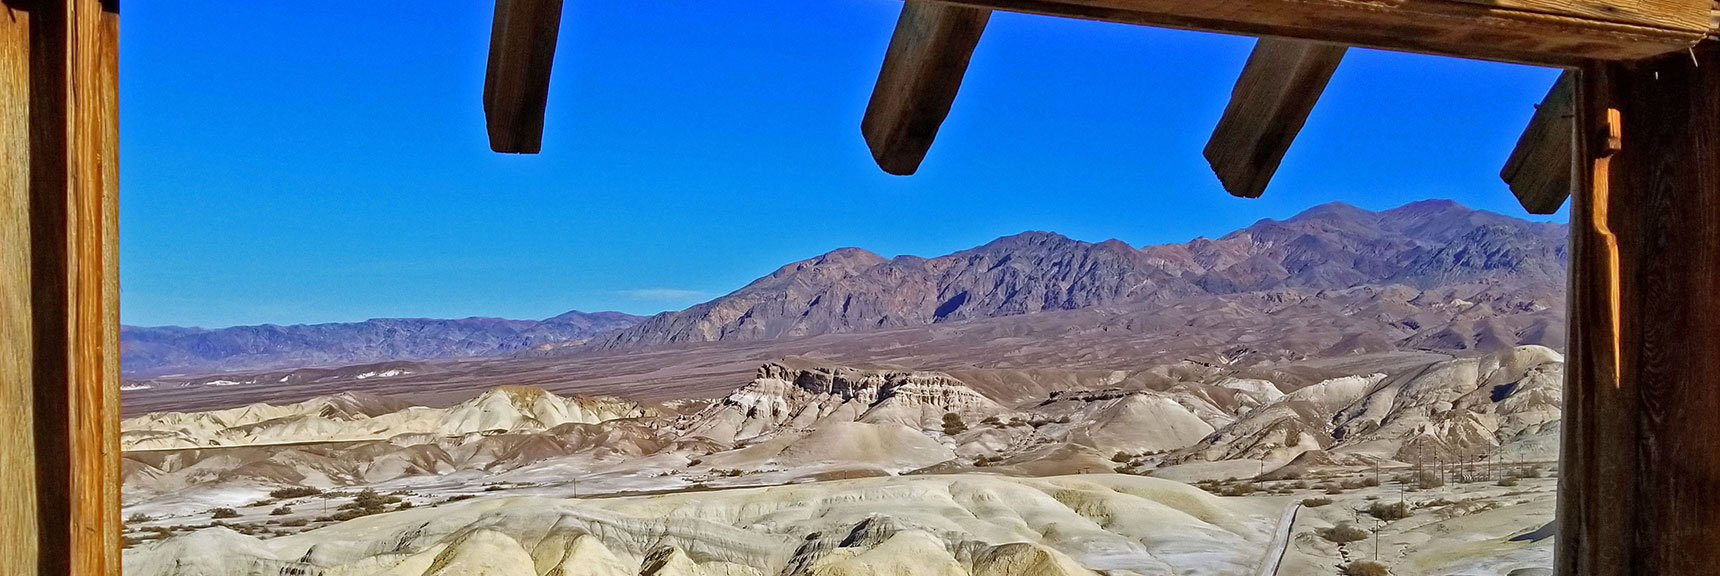 Table Rock (center) Viewed from Within the Tea House | Tea House & Table Rock Circuit | Furnace Creek | Death Valley National Park, California